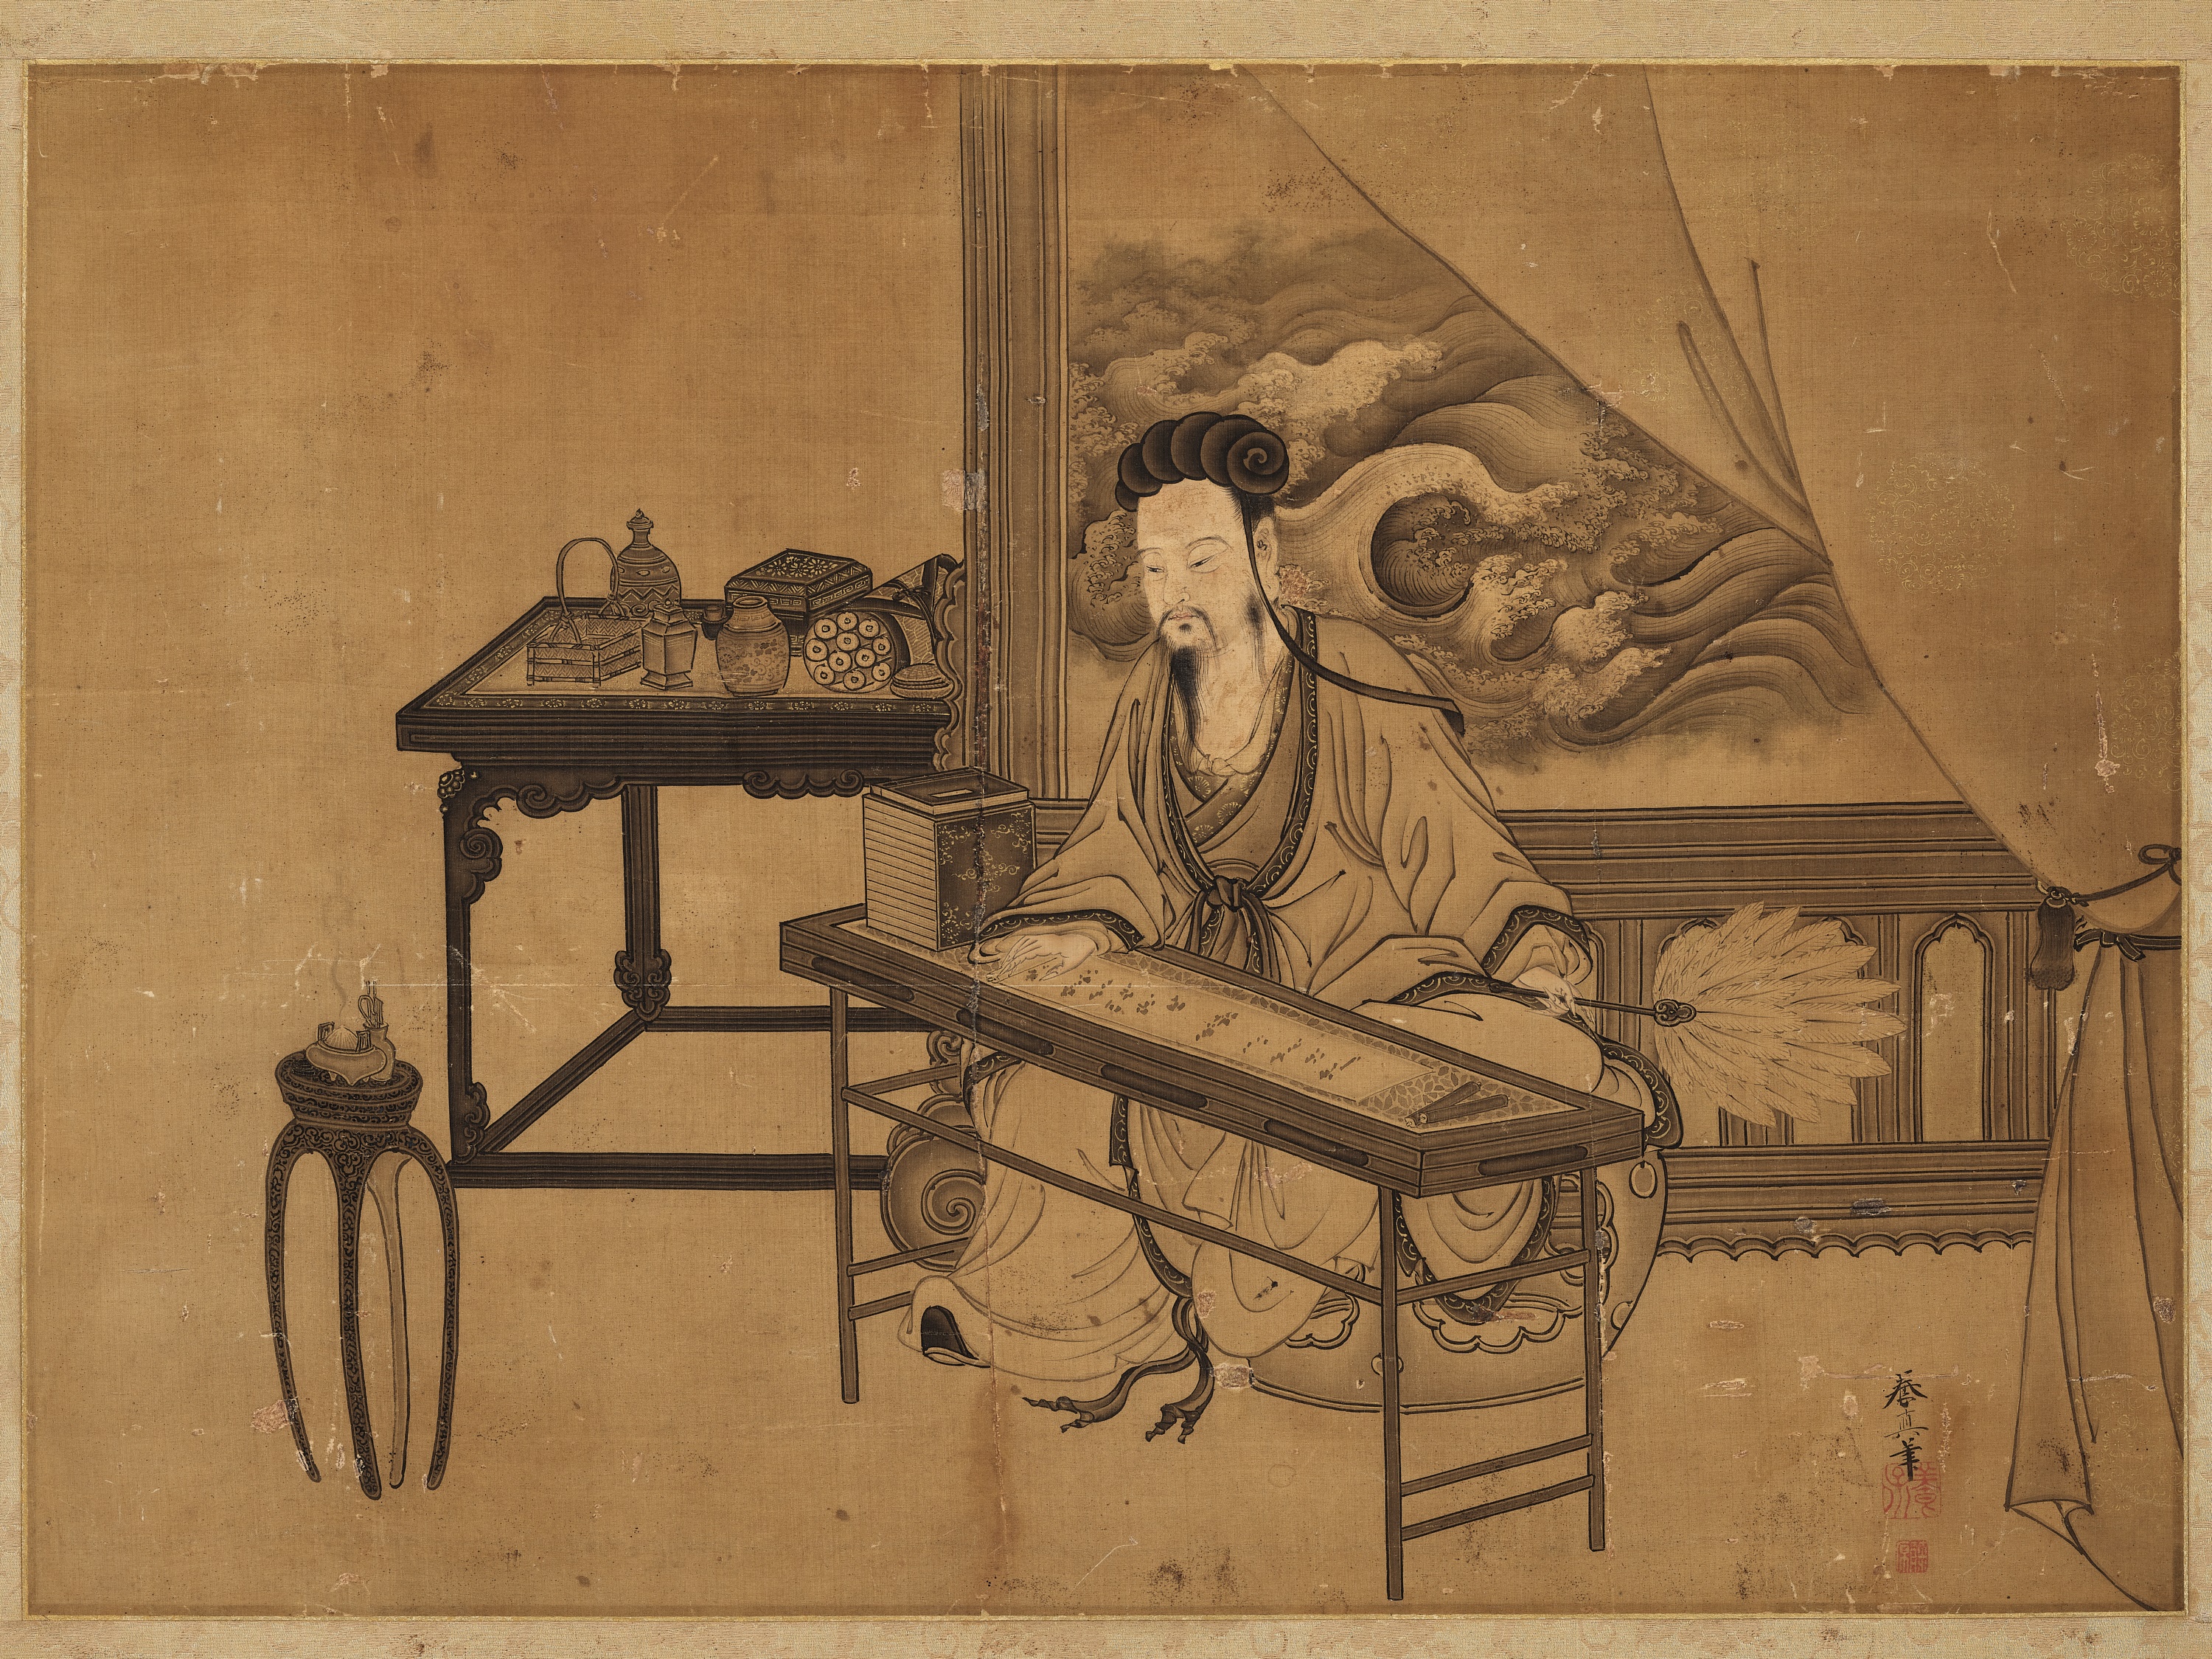 KOTO YOSHIN: A FINE KANO SCHOOL PAINTING OF 'SCHOLAR READING A SCROLL' - Image 4 of 8